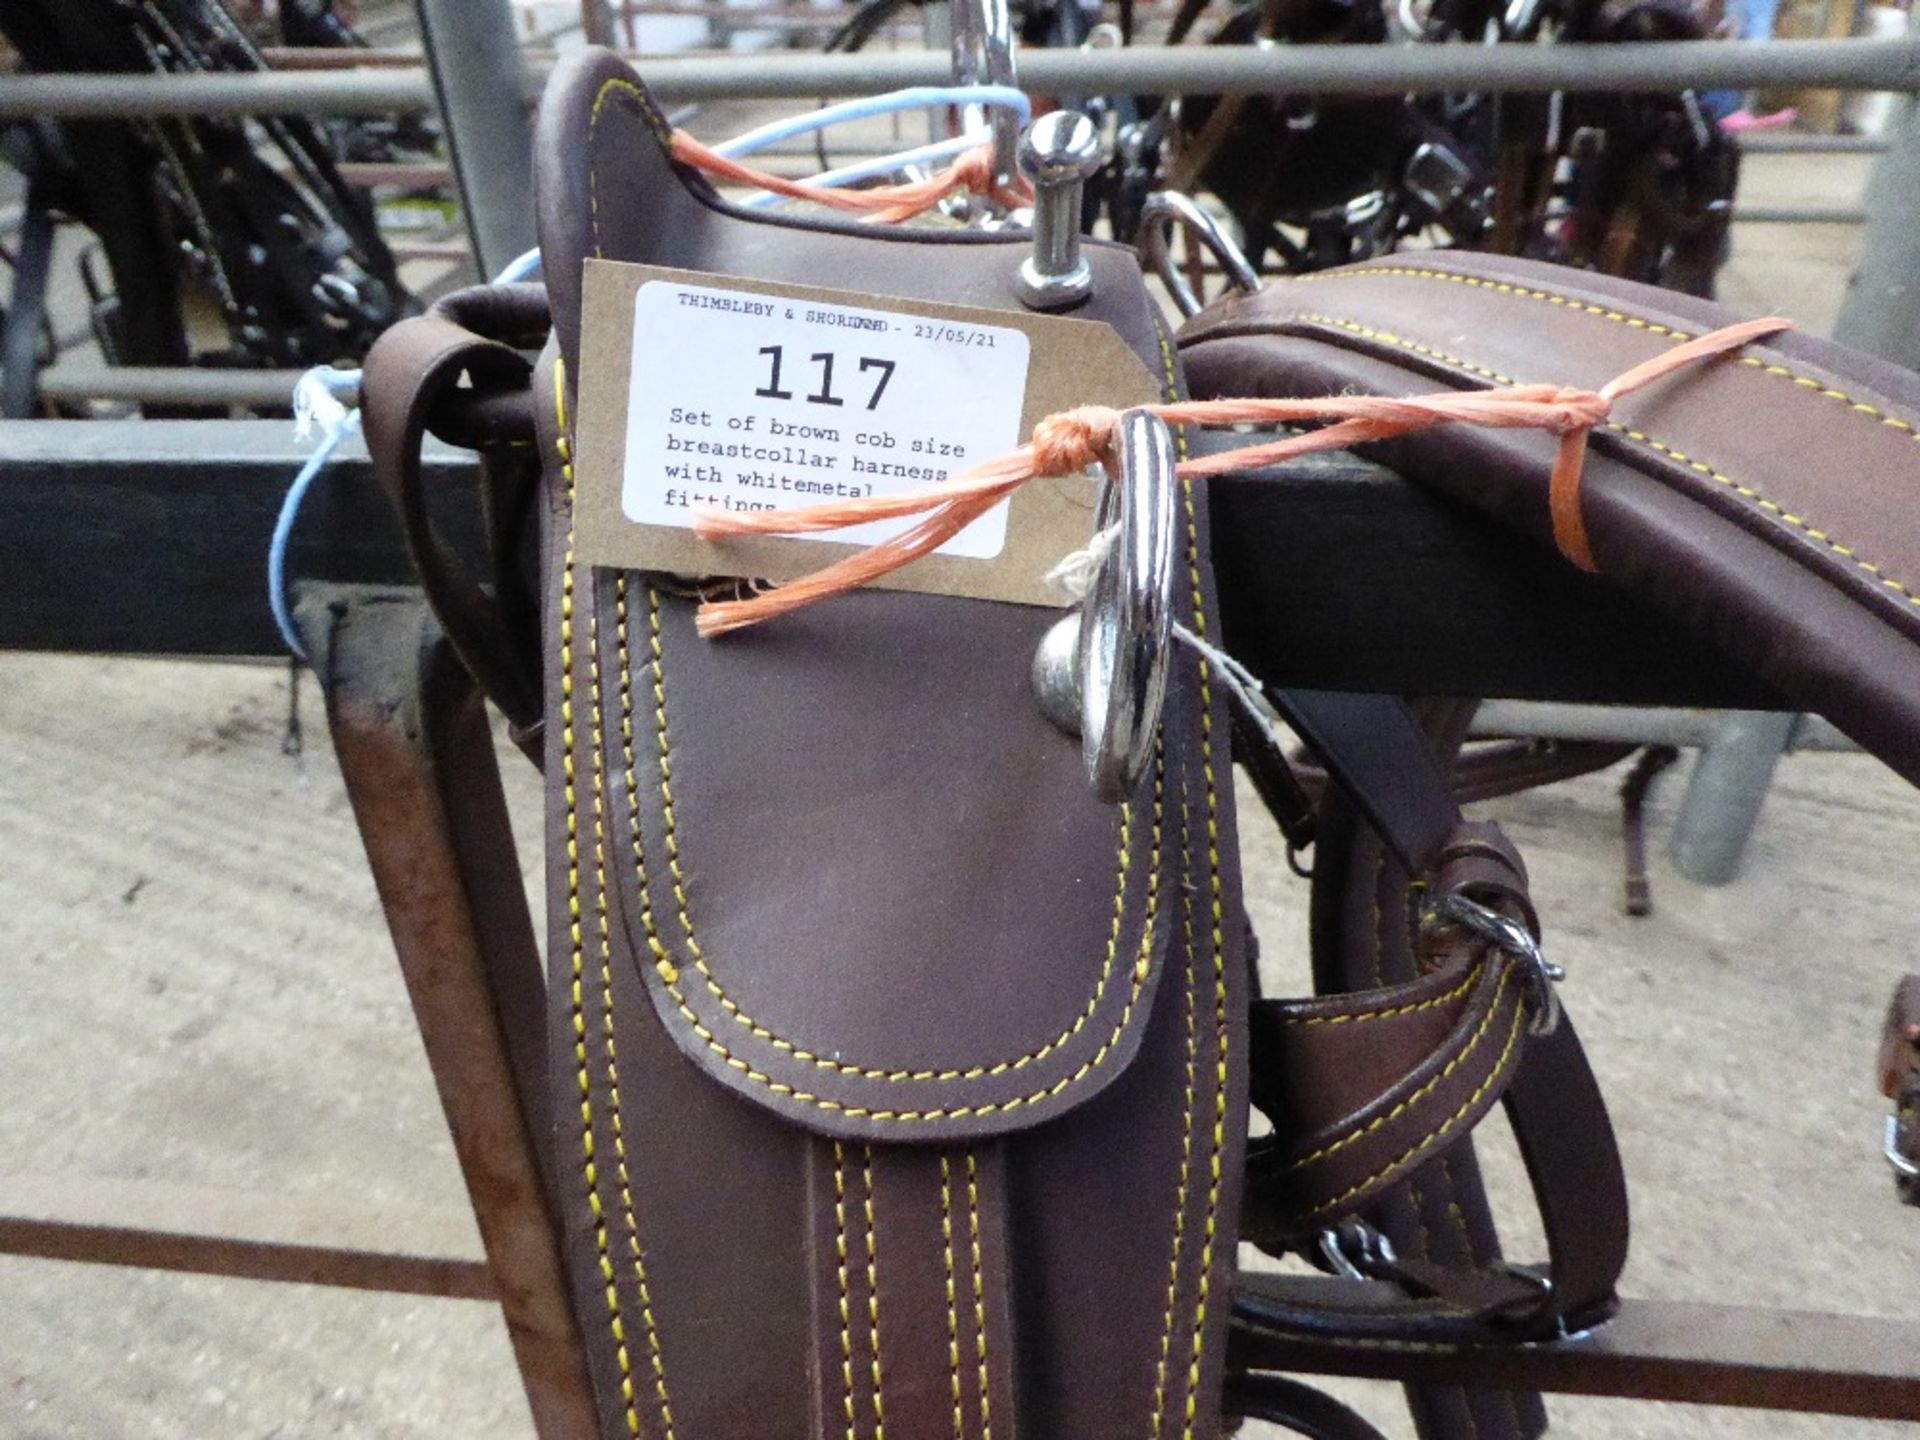 Set of brown cob size breastcollar harness with whitemetal fittings - carries VAT - Image 2 of 4